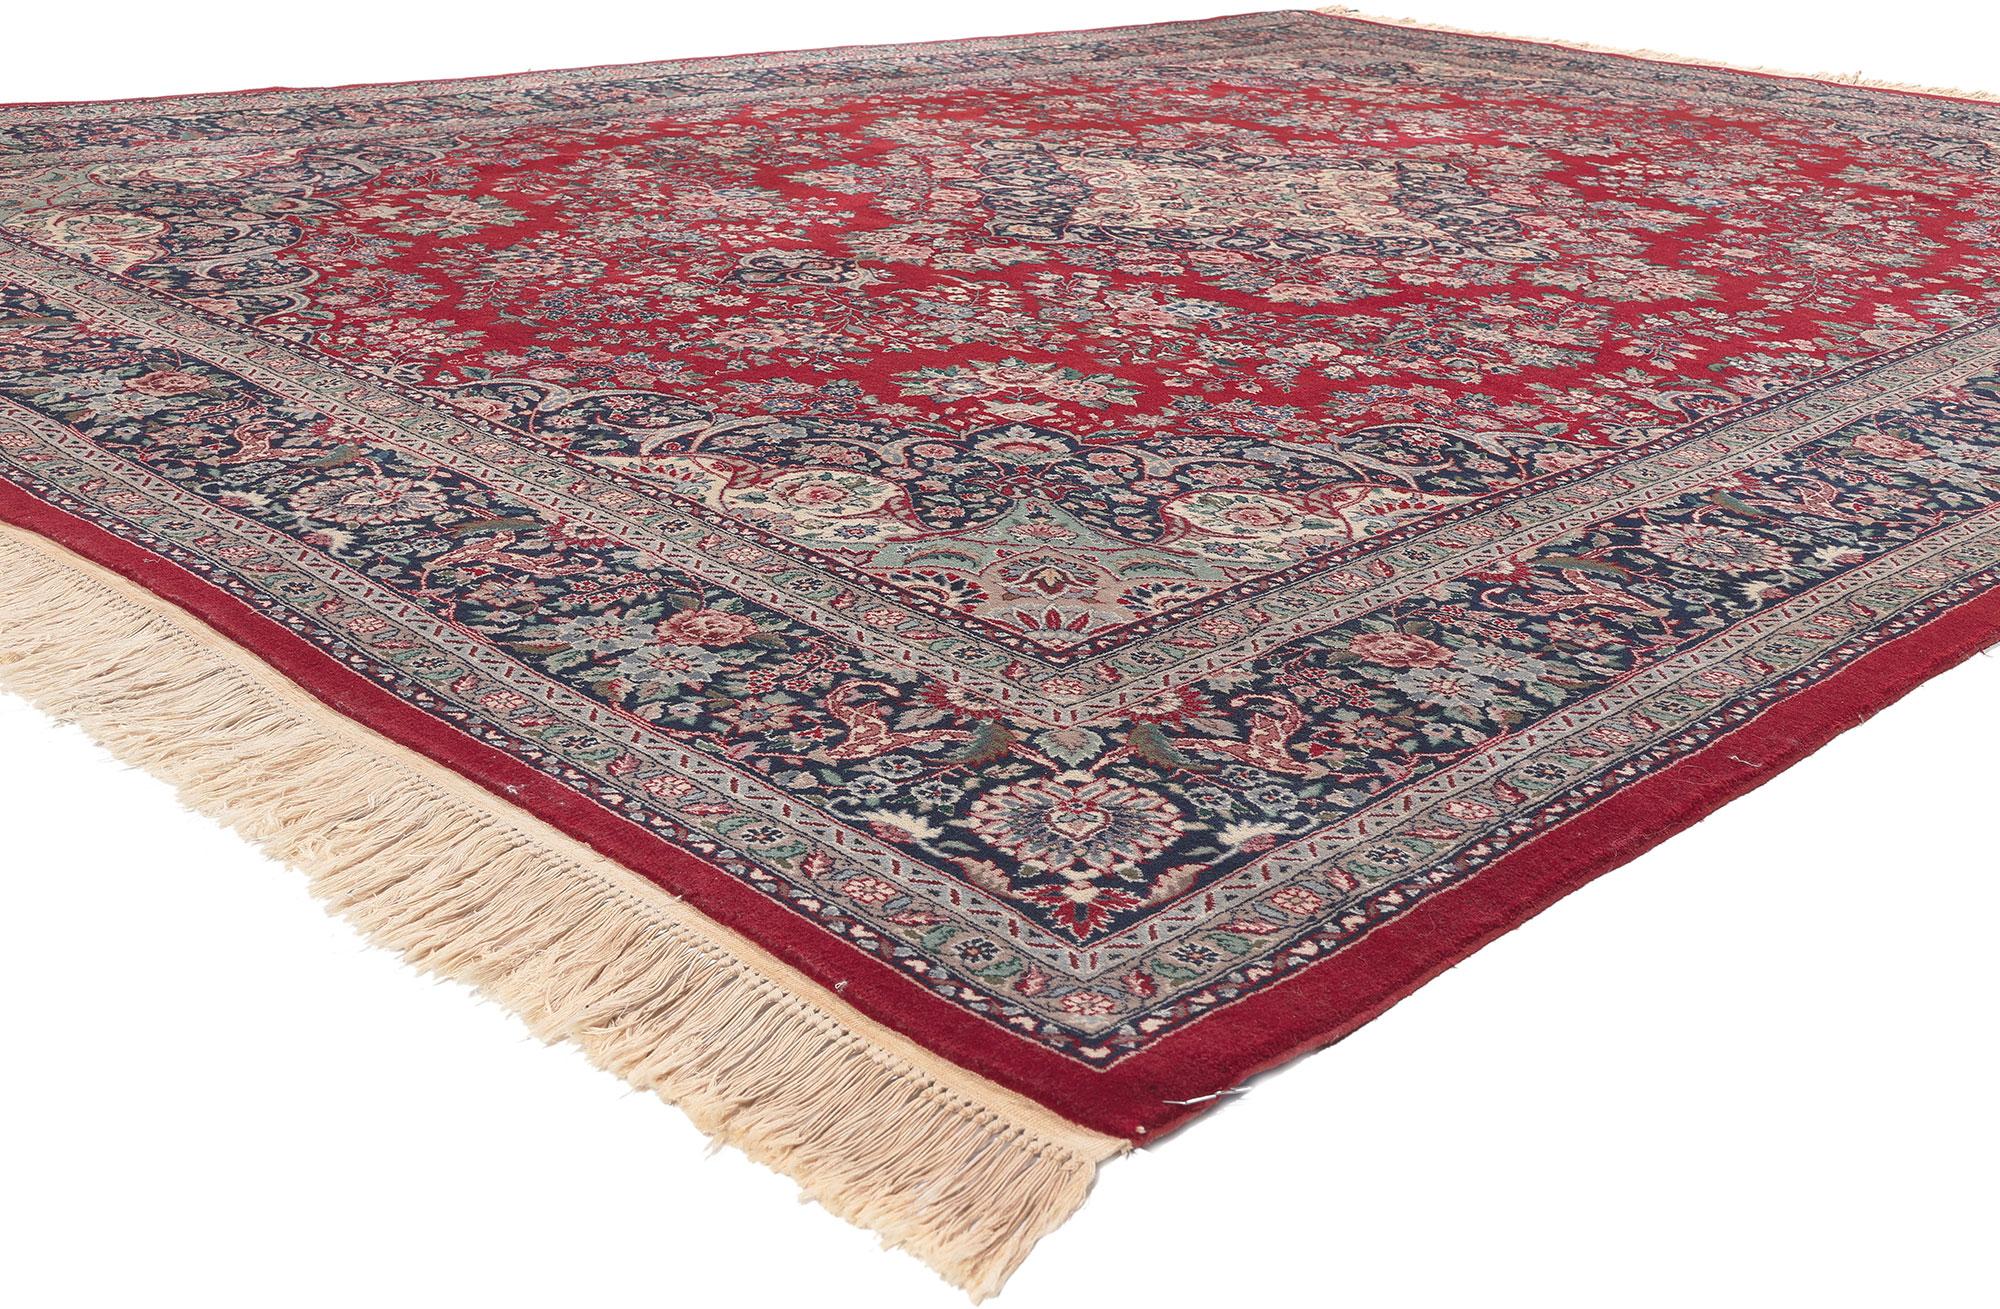 78555 Vintage Pakistani Kerman Rug, 09'00 x 12'02. 
Emulating regal charm with incredible detail and texture, this hand knotted vintage Pakistani Kerman rug is a captivating vision of woven beauty. The intricate floral design and sophisticated color